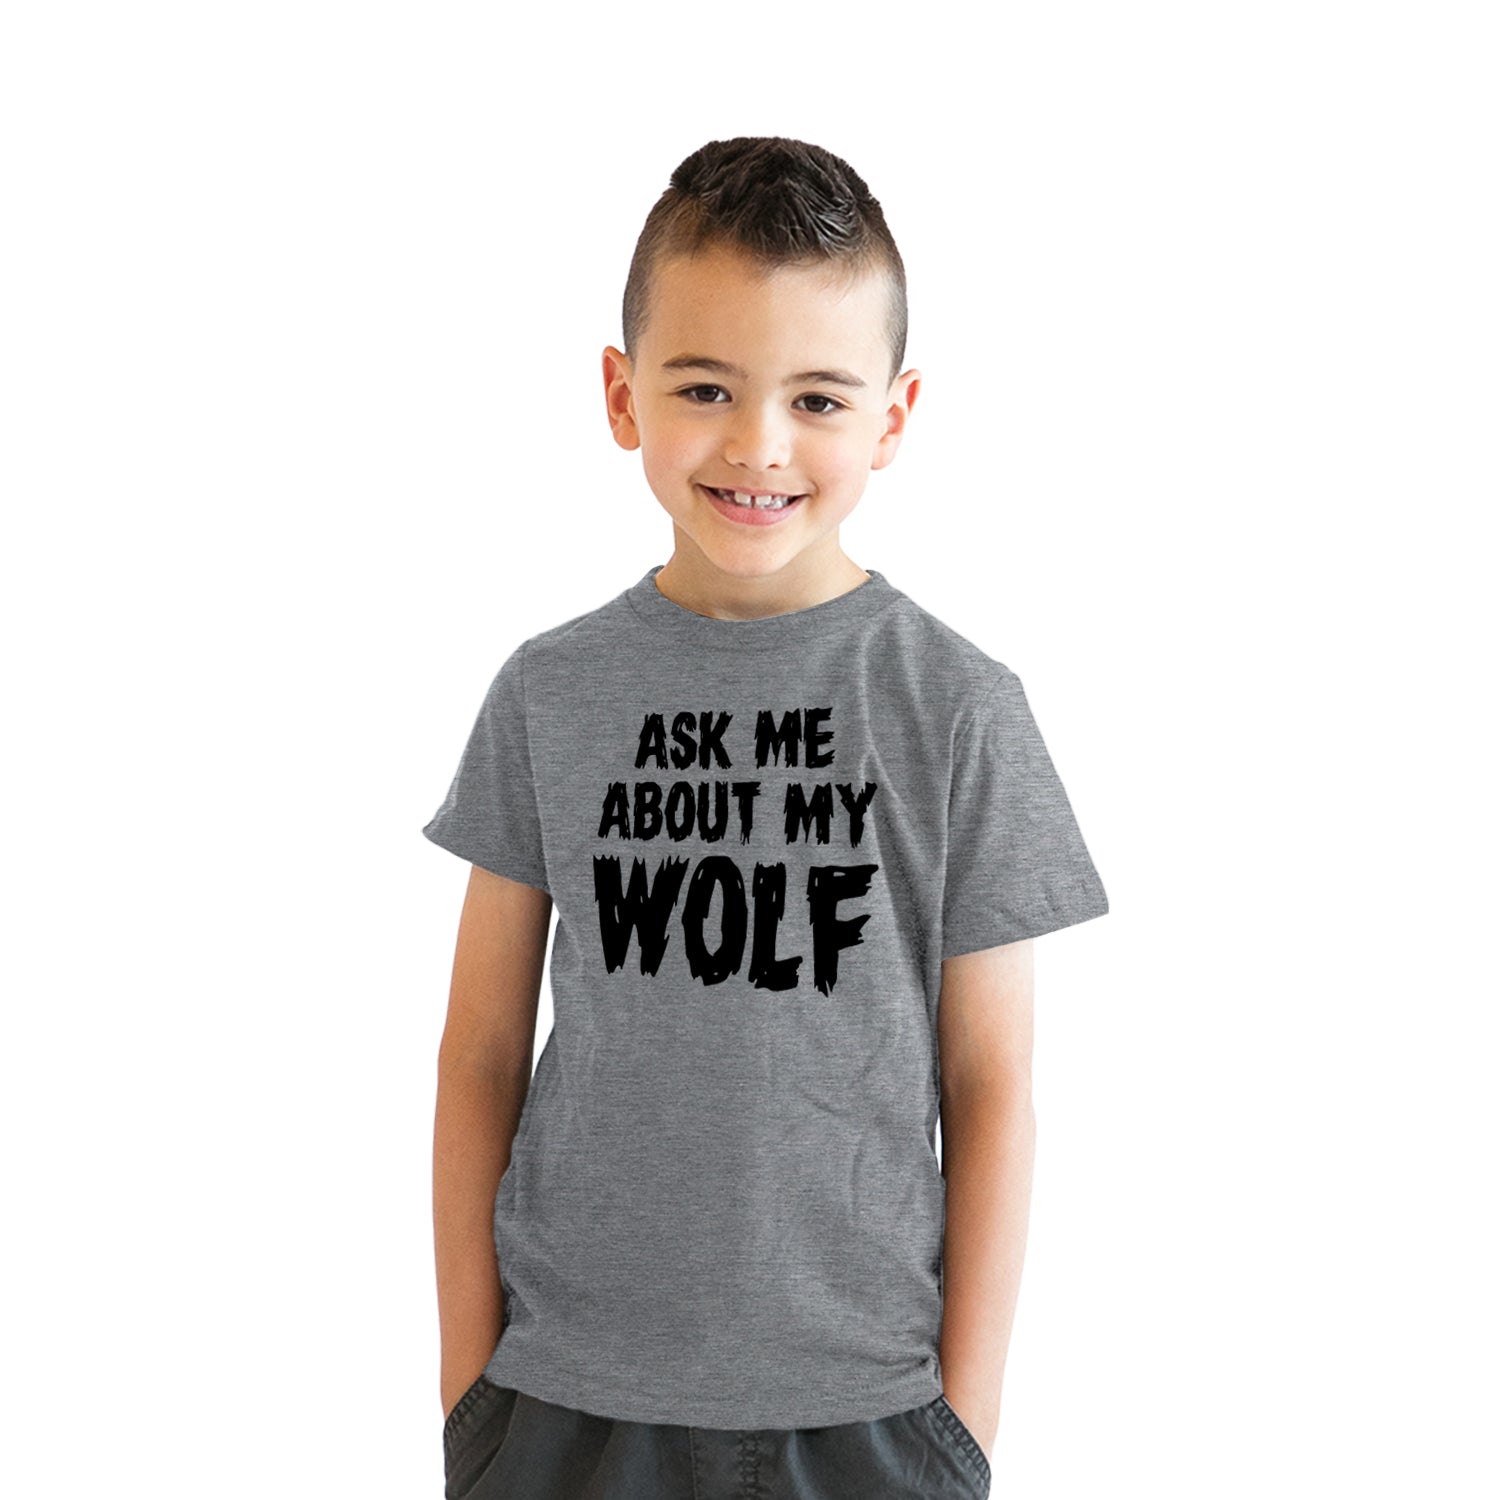 Funny Light Heather Grey Ask Me About My Werewolf Flip Youth T Shirt Nerdy Flip Tee